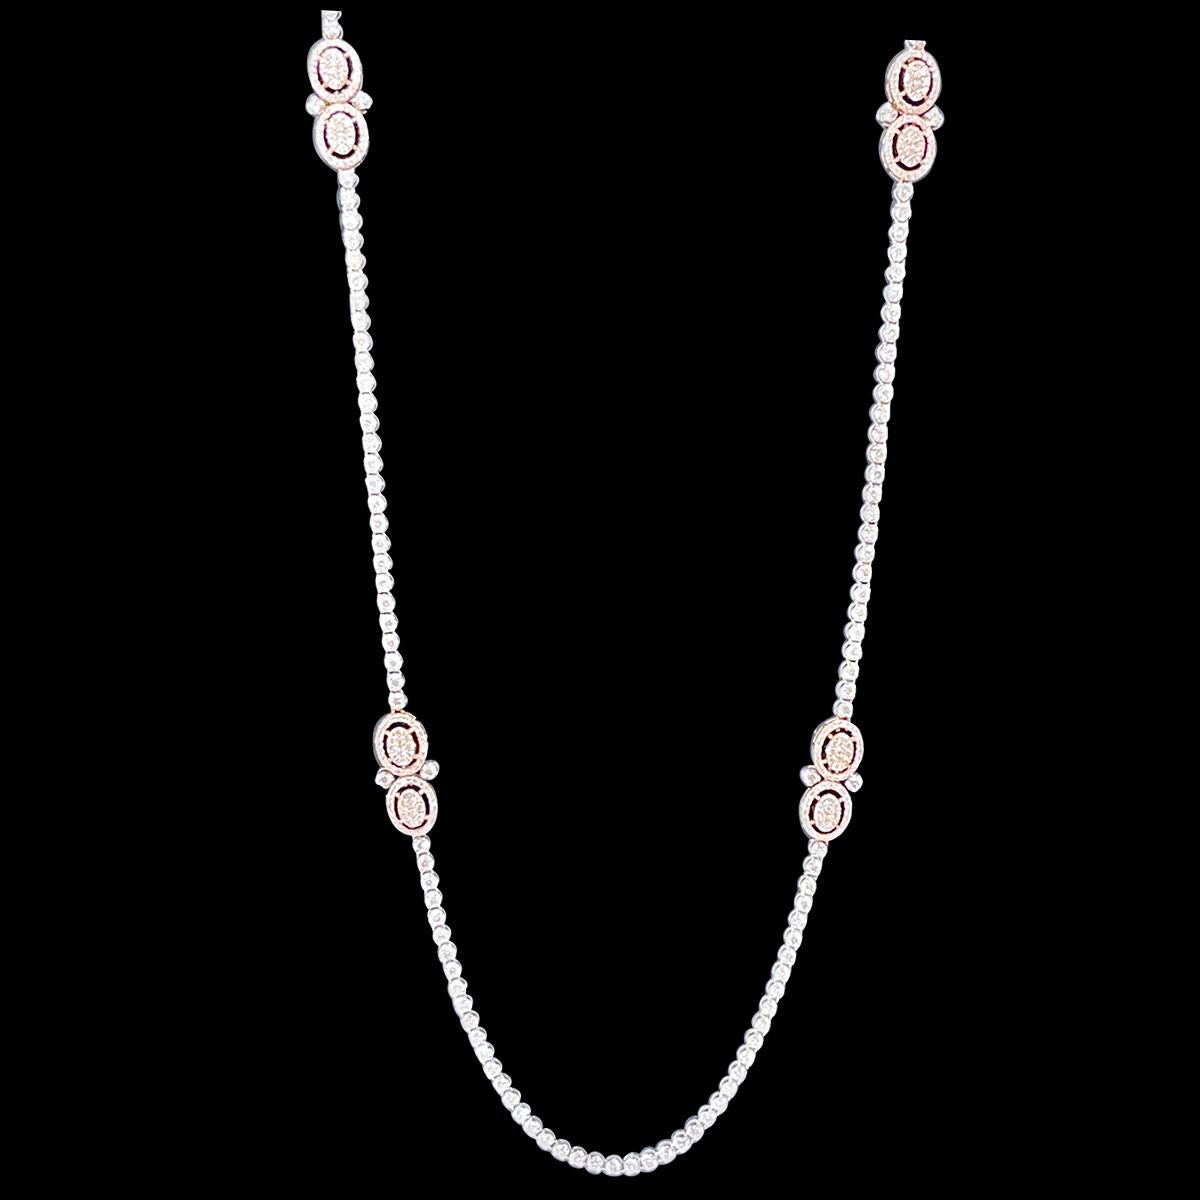 8 Ct Brilliant Cut Diamond Long Necklace in White & Pink 14 K Gold 27 Gm 4